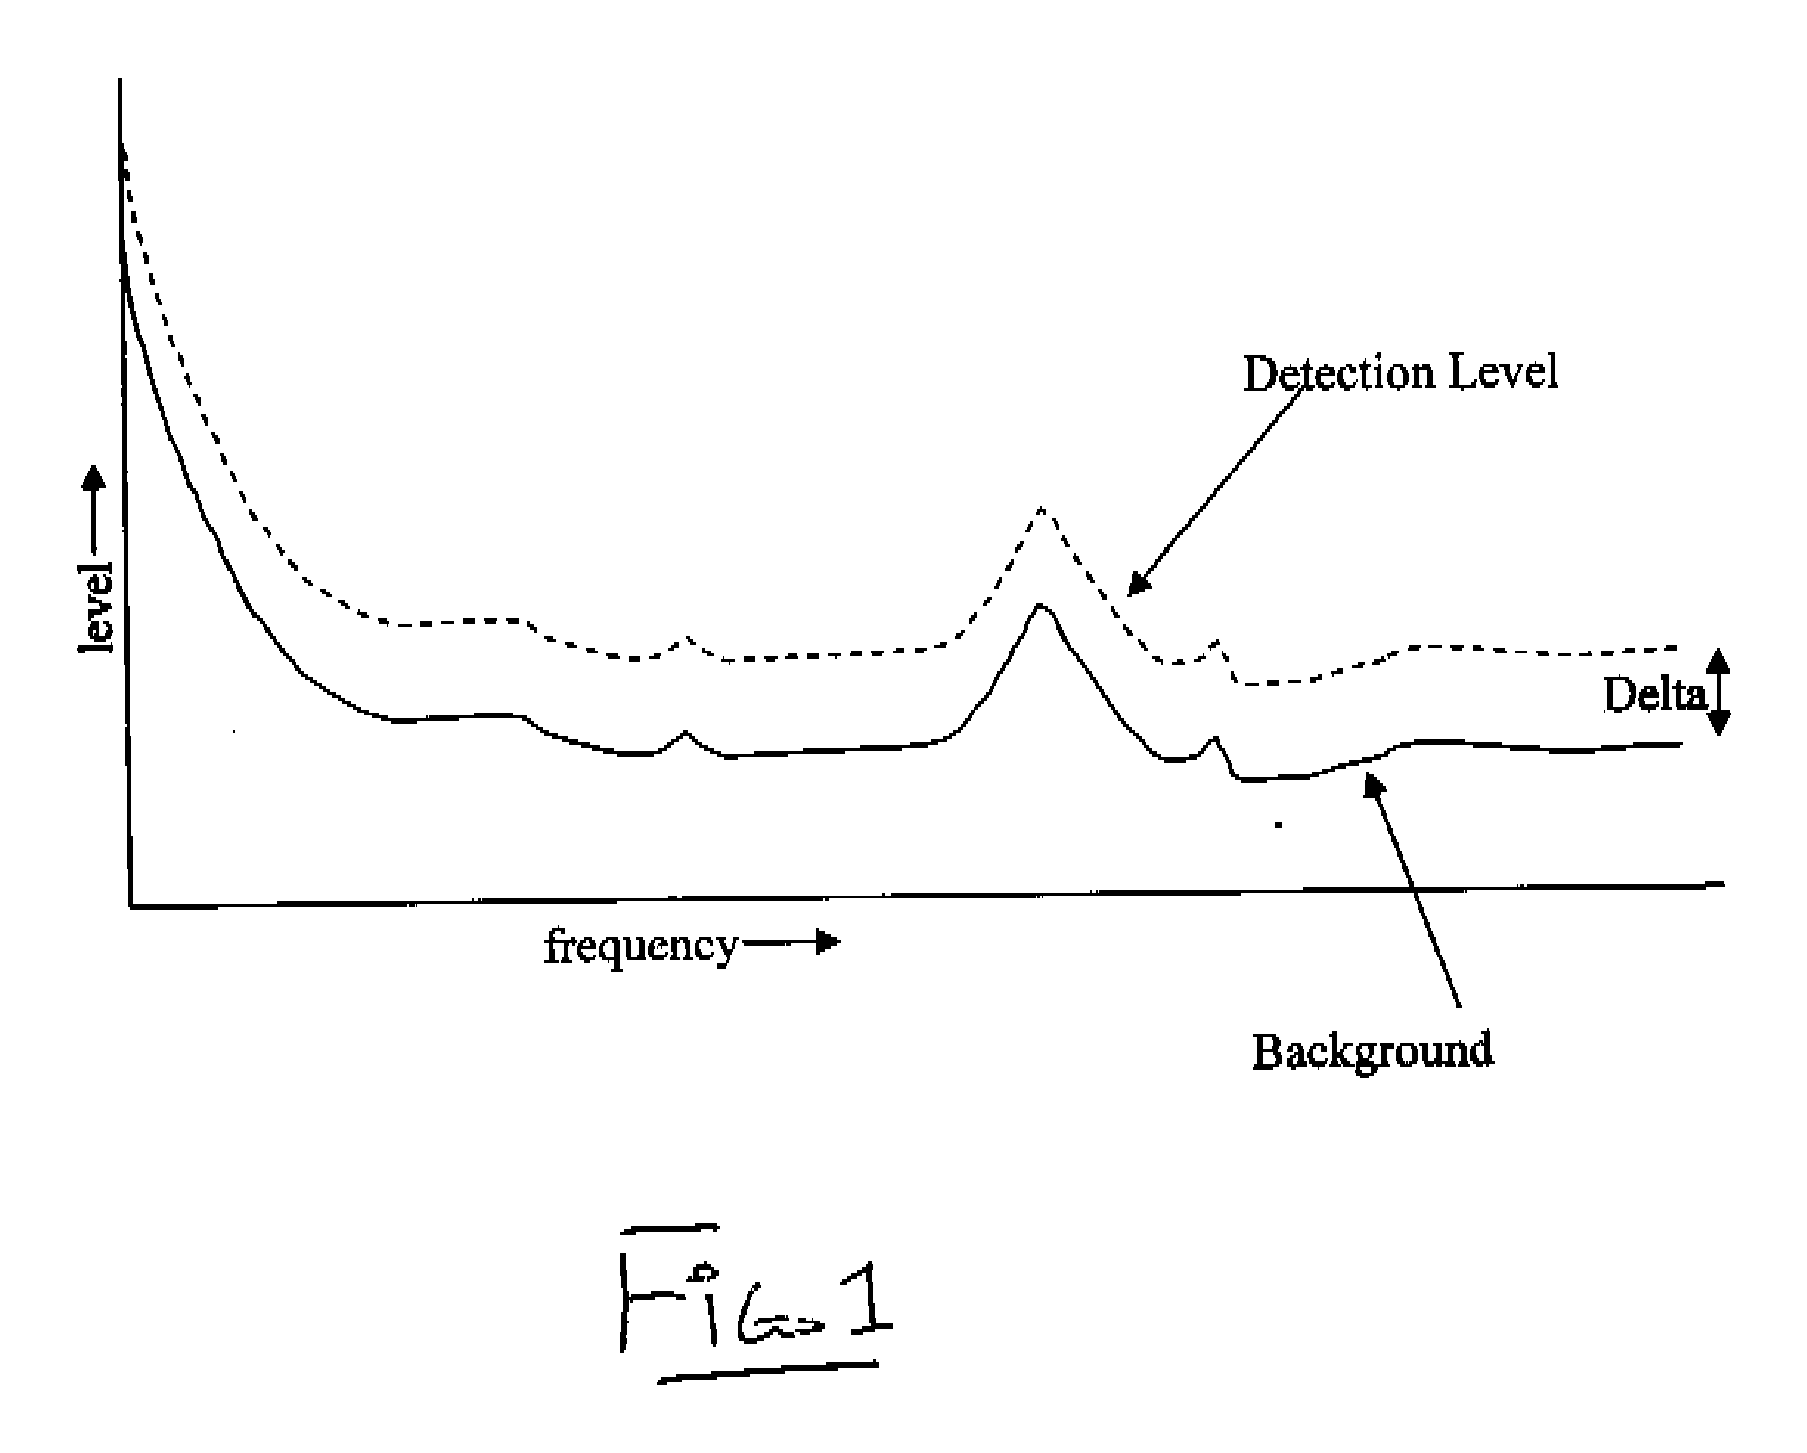 Frequency envelope detection method for signal analysis